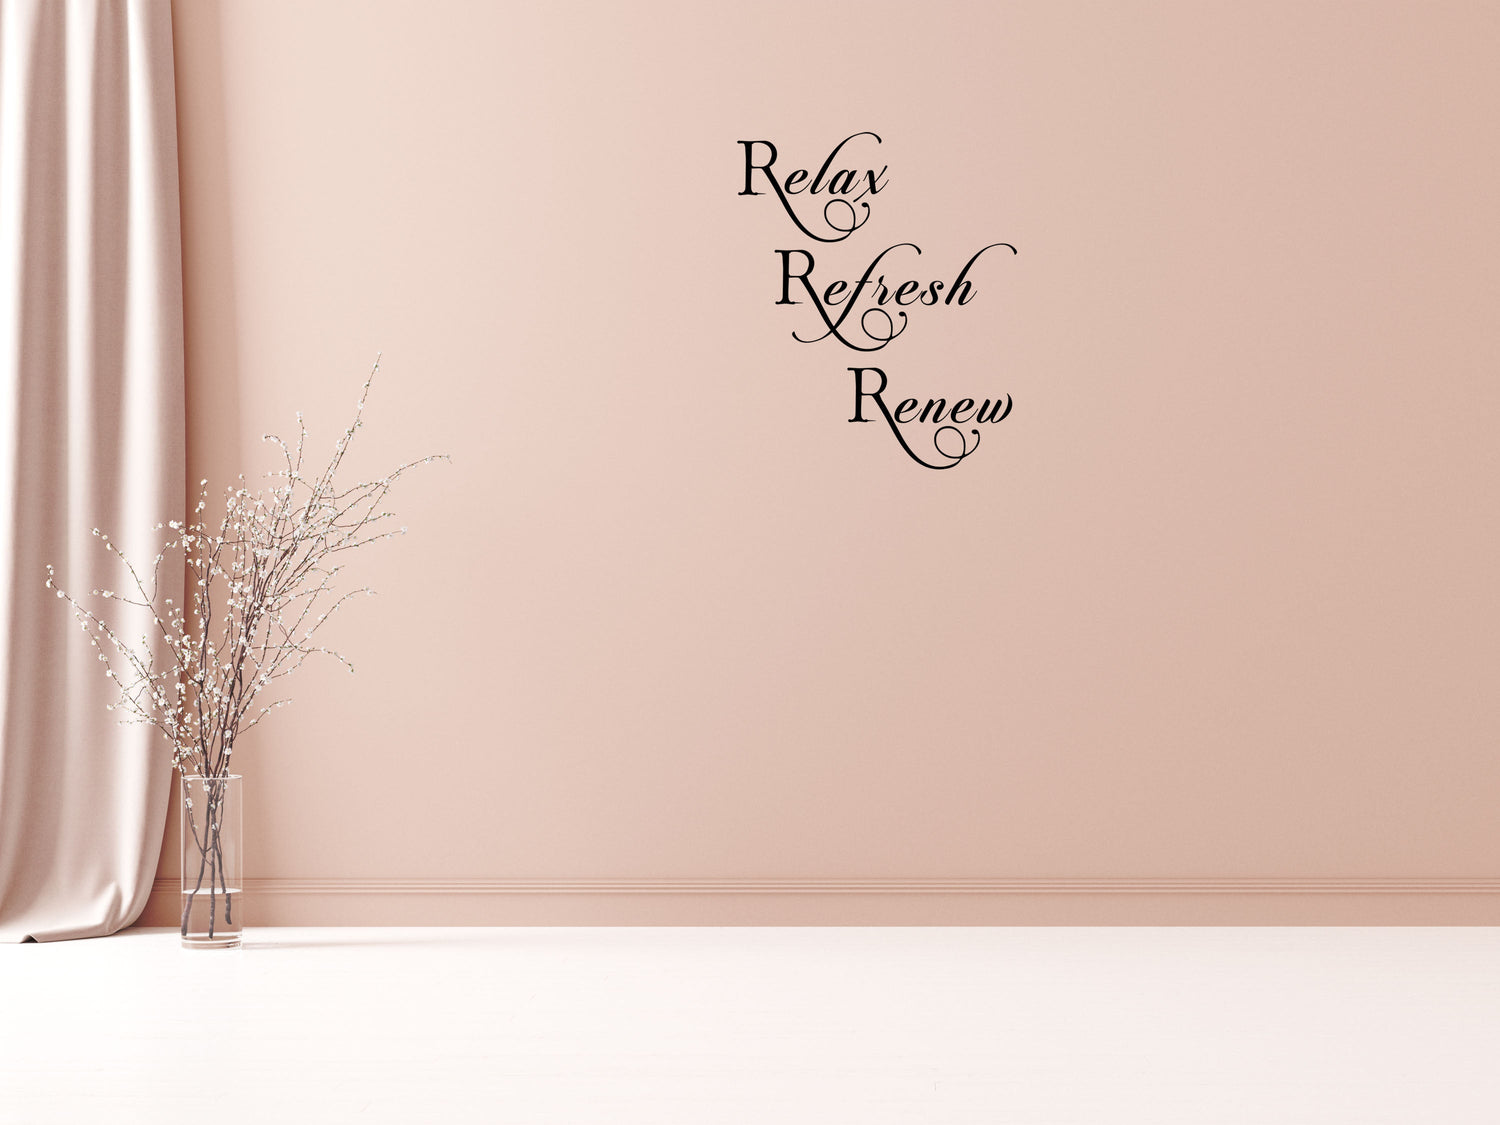 Relax Refresh Renew Wall Decal Vinyl Wall Decal Inspirational Wall Signs 